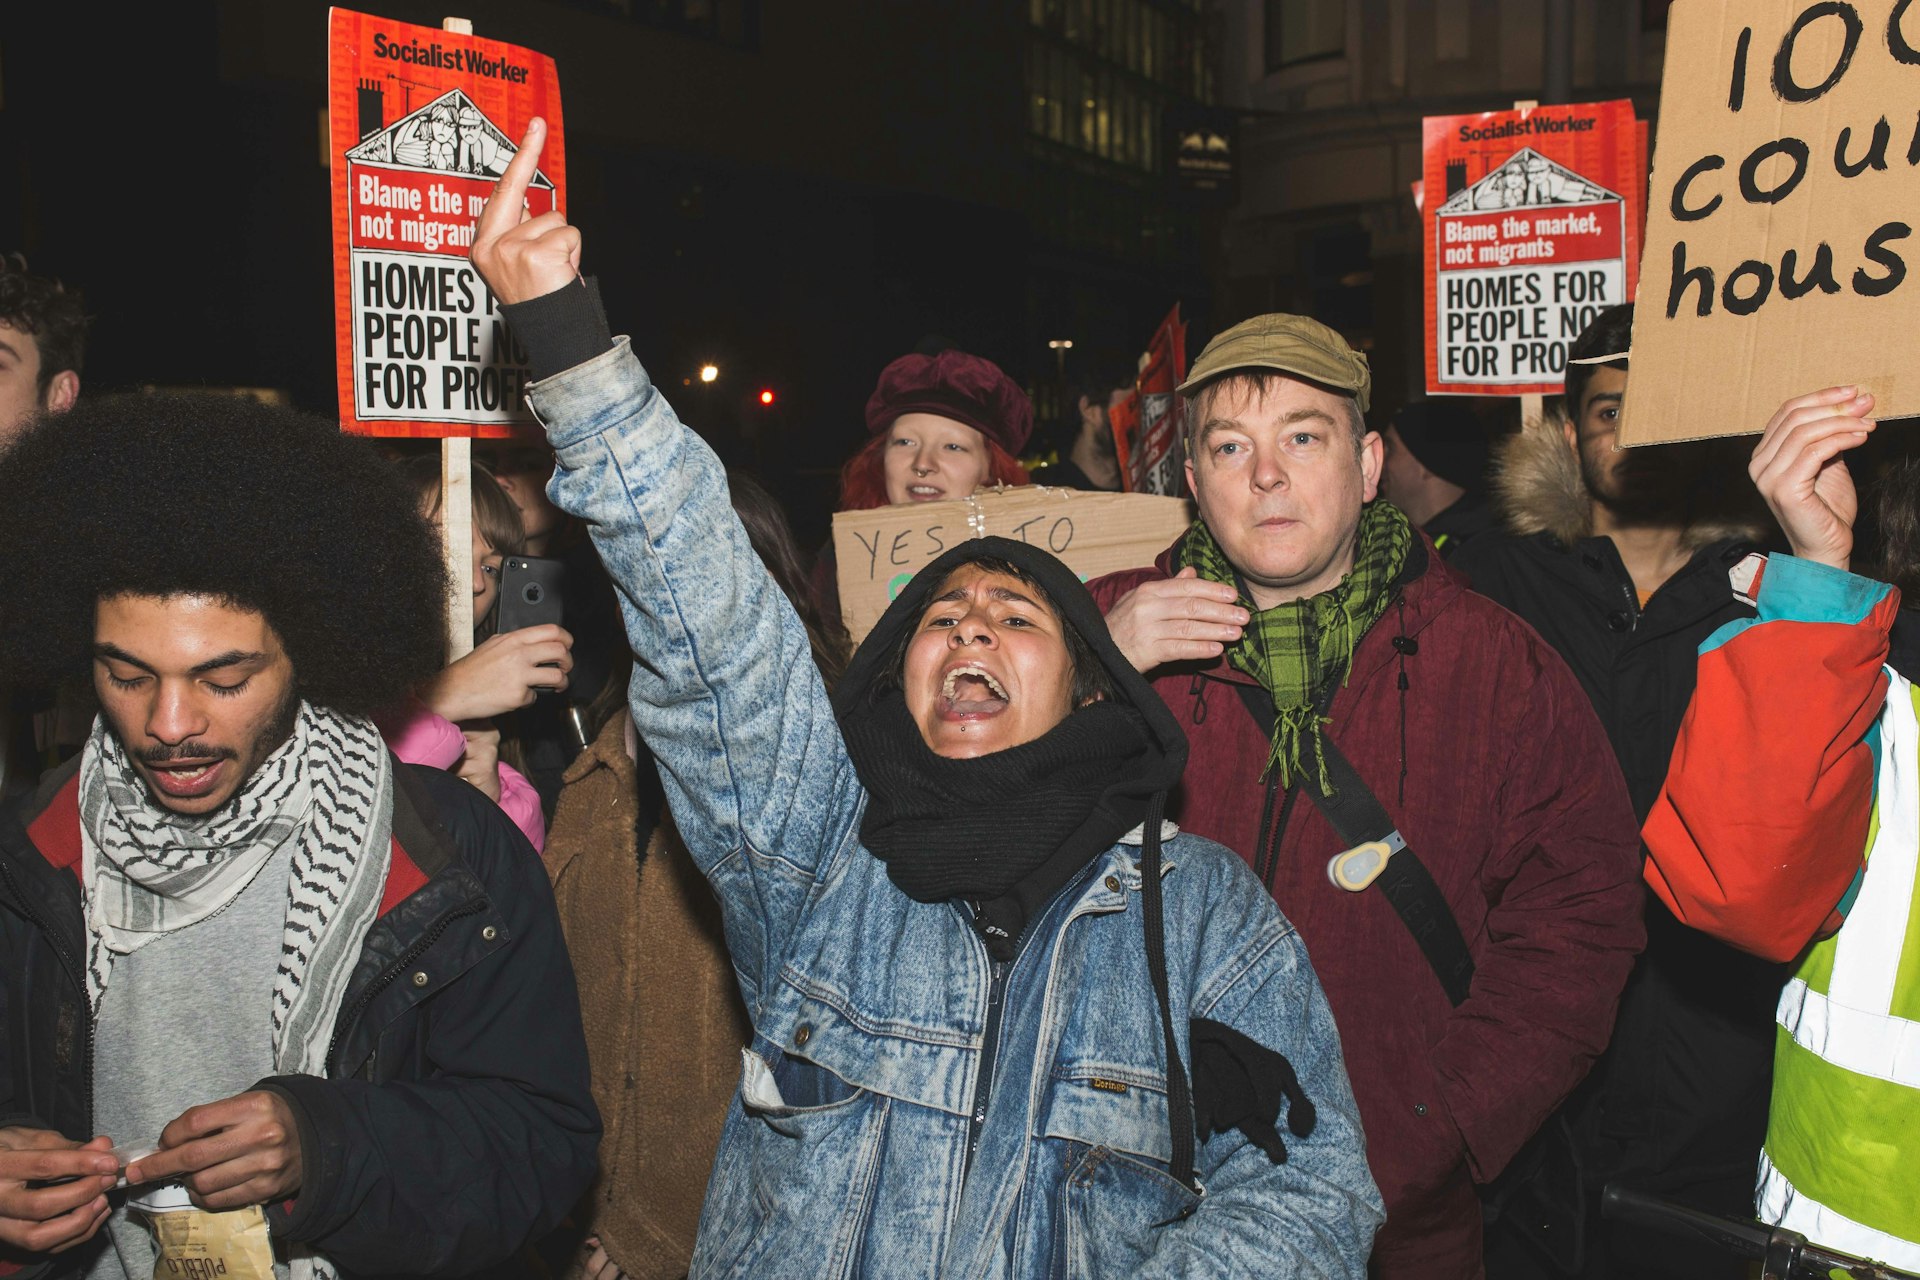 Last night saw a victory for anti-gentrification activists